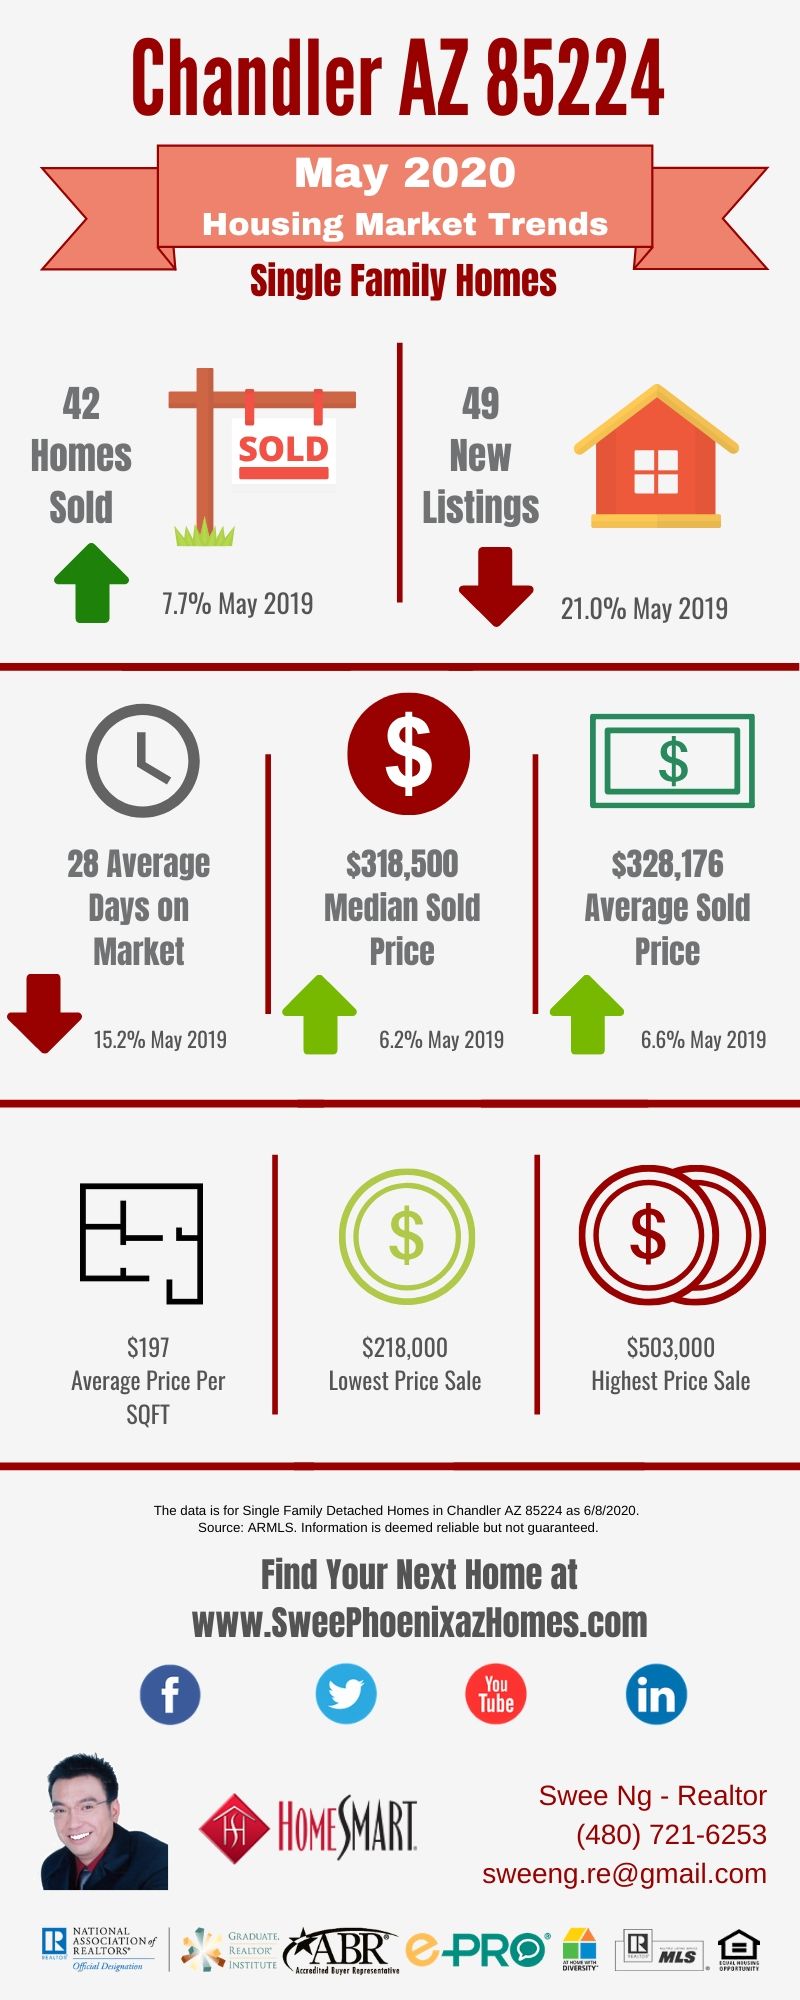 Chandler AZ 85224 Housing Market Trends Report May 2020, House Value, Real Estate and Statistic by Swee Ng